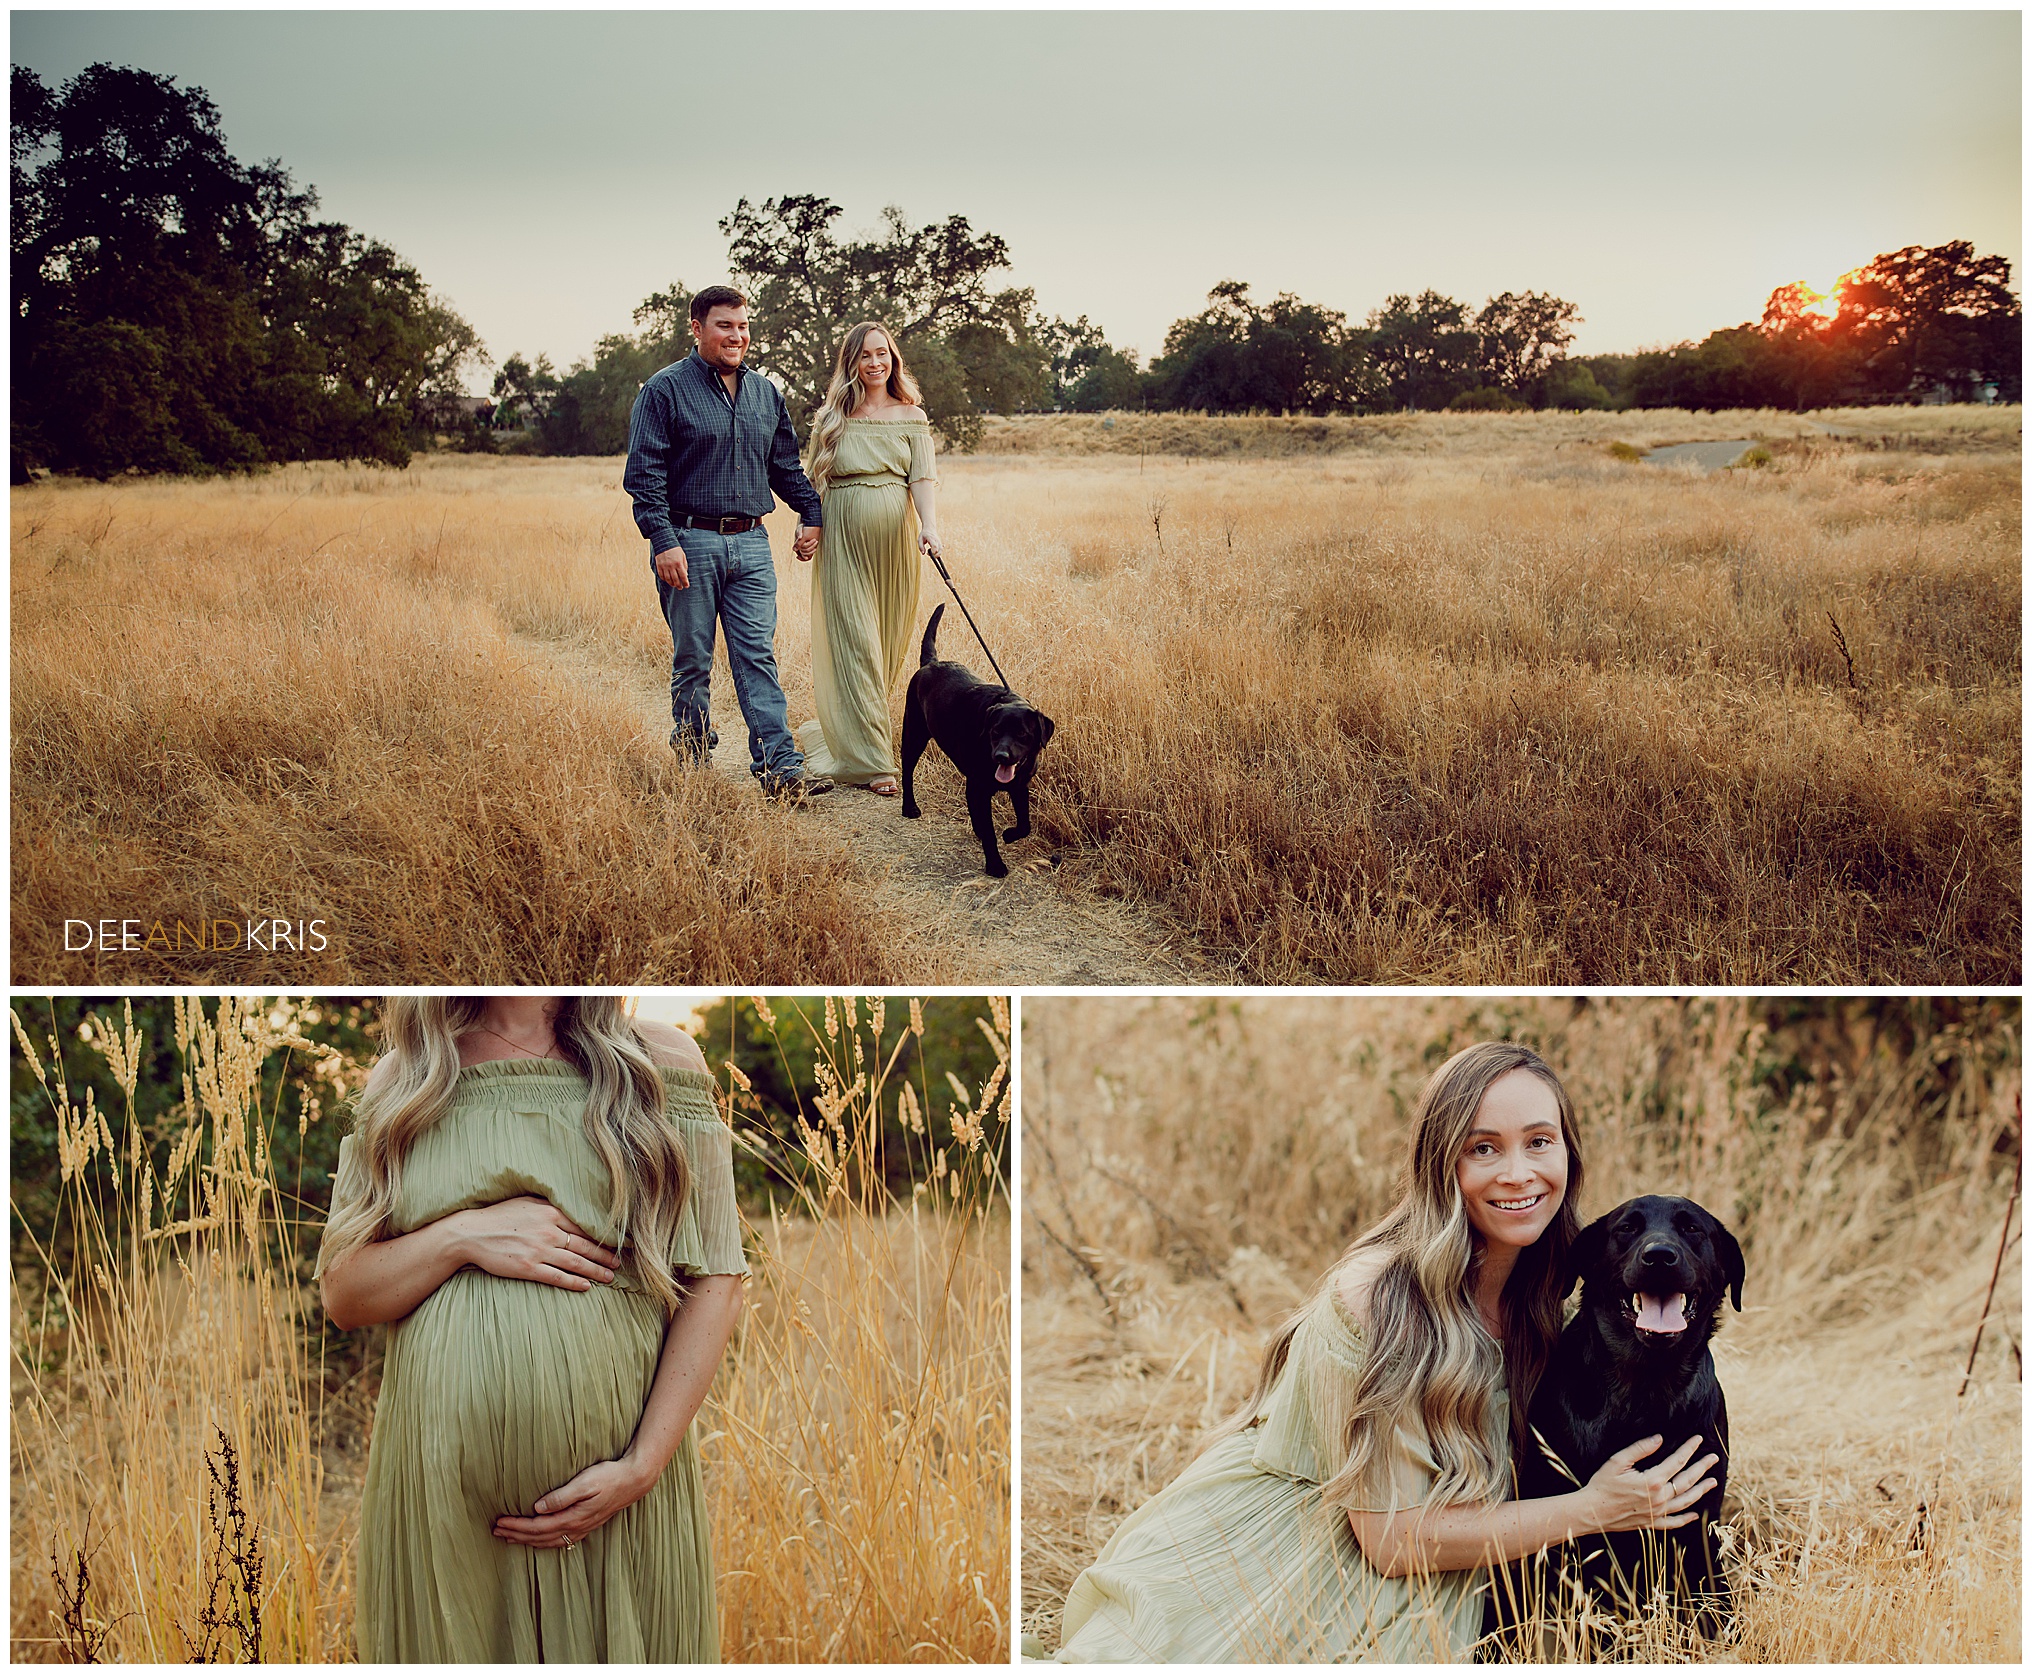 High End Studio Maternity Portraits by Dee and Kris Photography - Dee &  Kris Photography